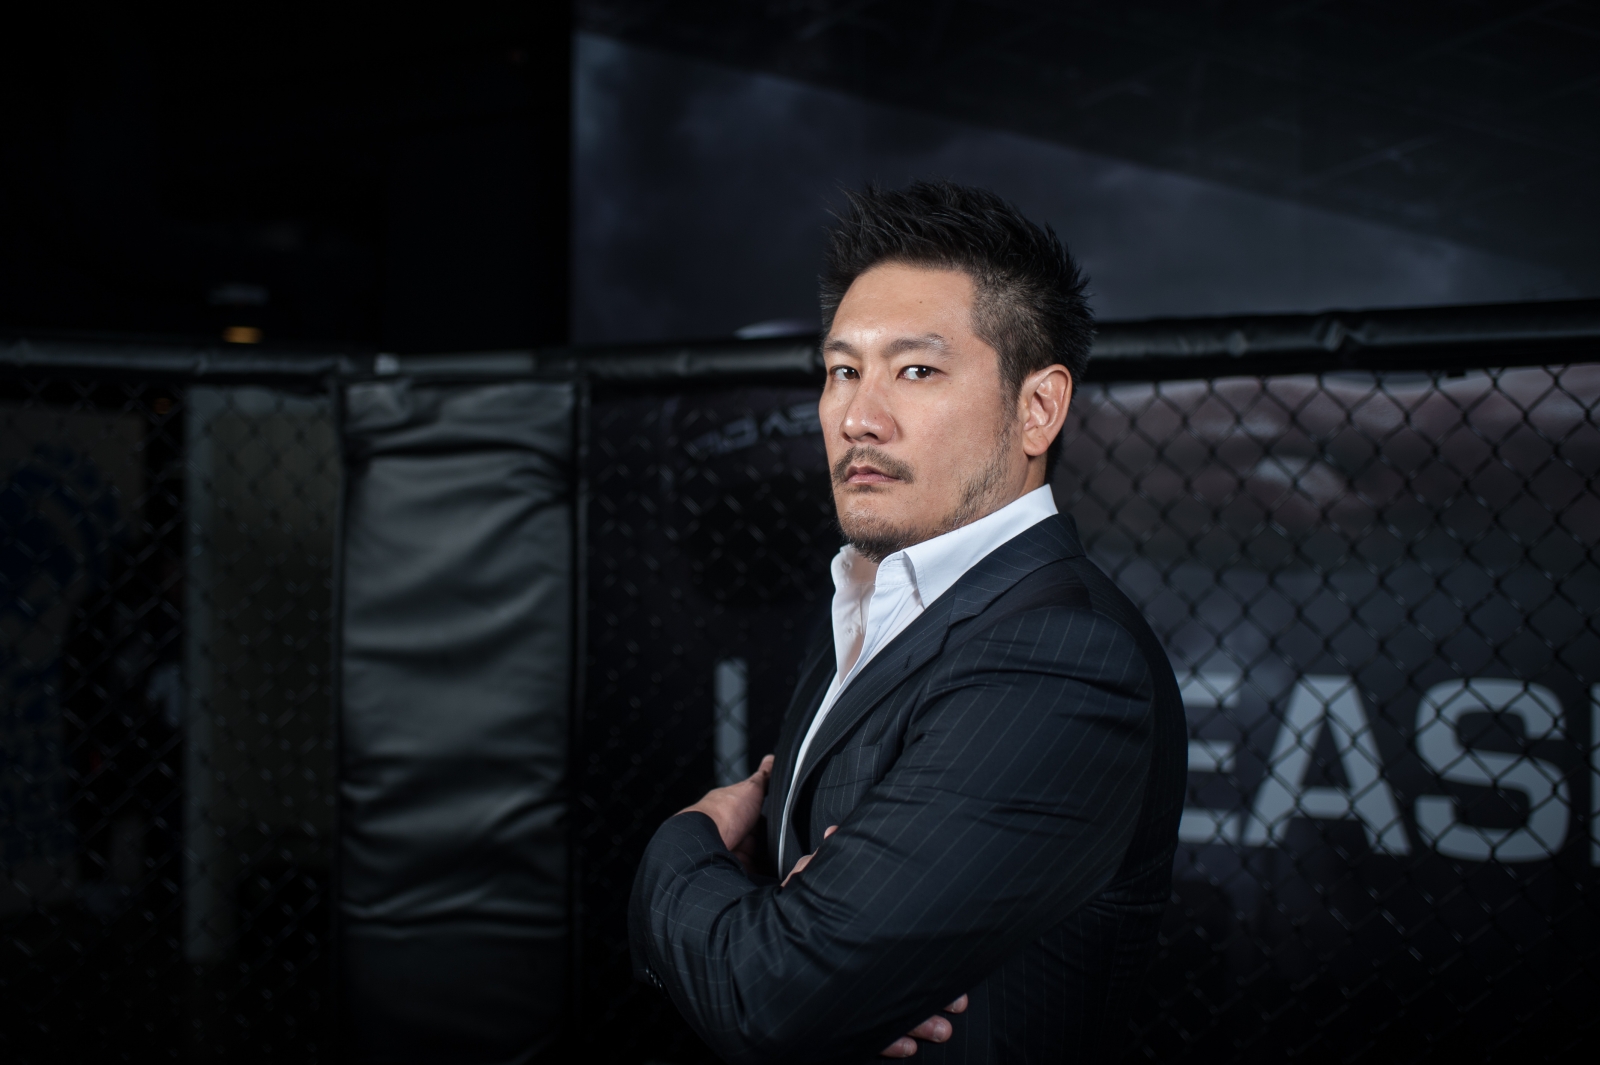 'I'd love Dana White to give me a call' - ONE Championship ready to discuss UFC crossover fights